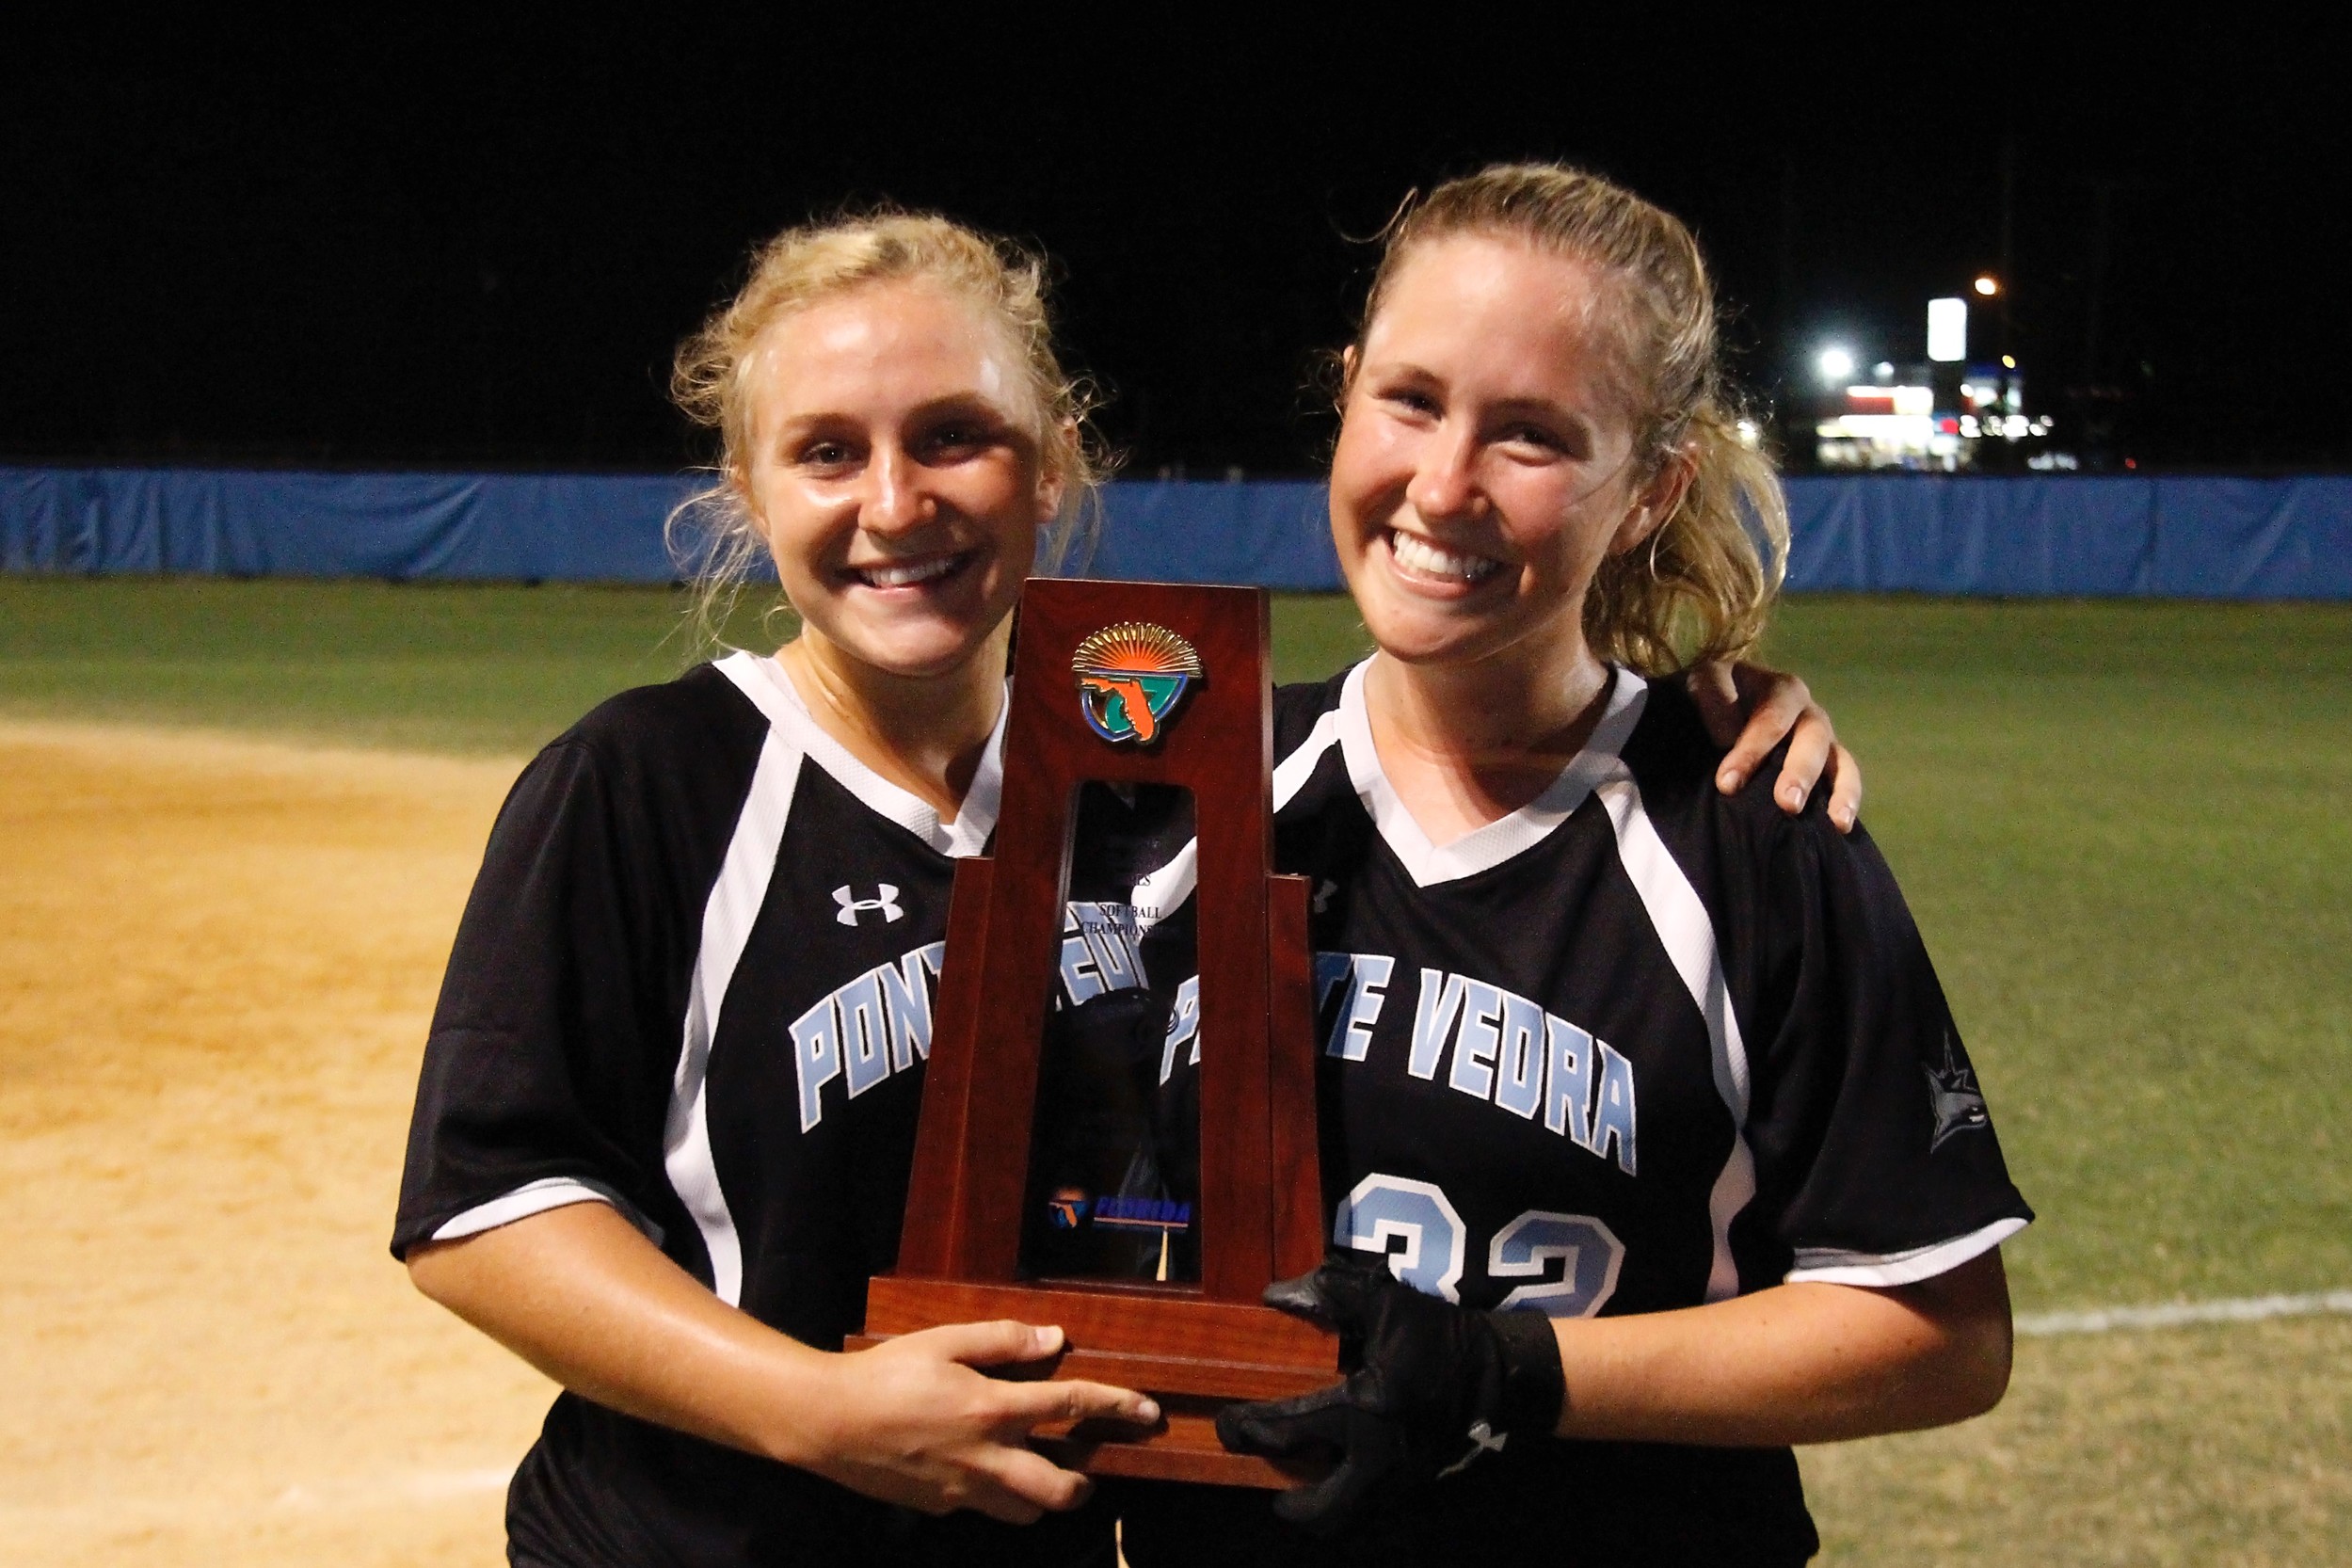 Seniors Taylor Bradshaw (L) and Farley Callaghan pose proudly their district trophy.